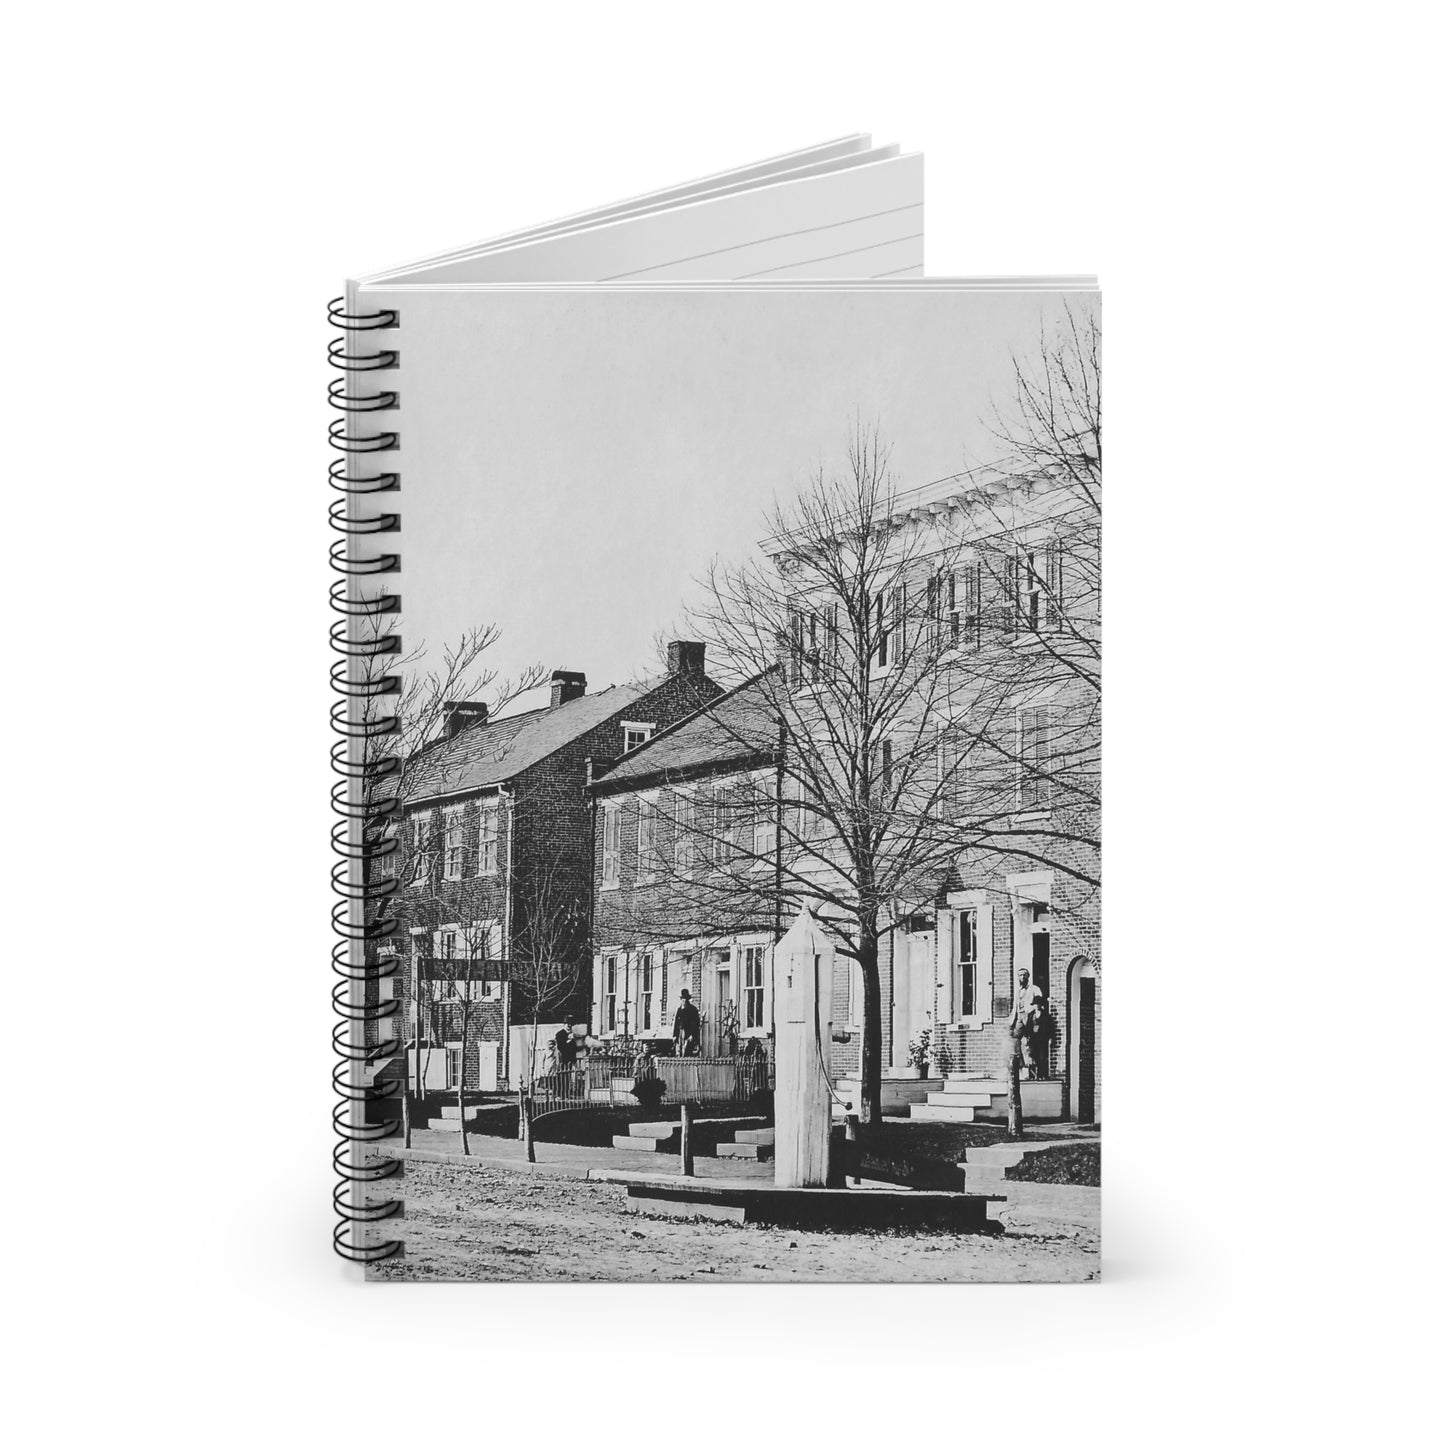 A notebook with an old historical photograph of Market Square in Manheim Pennsylvania.